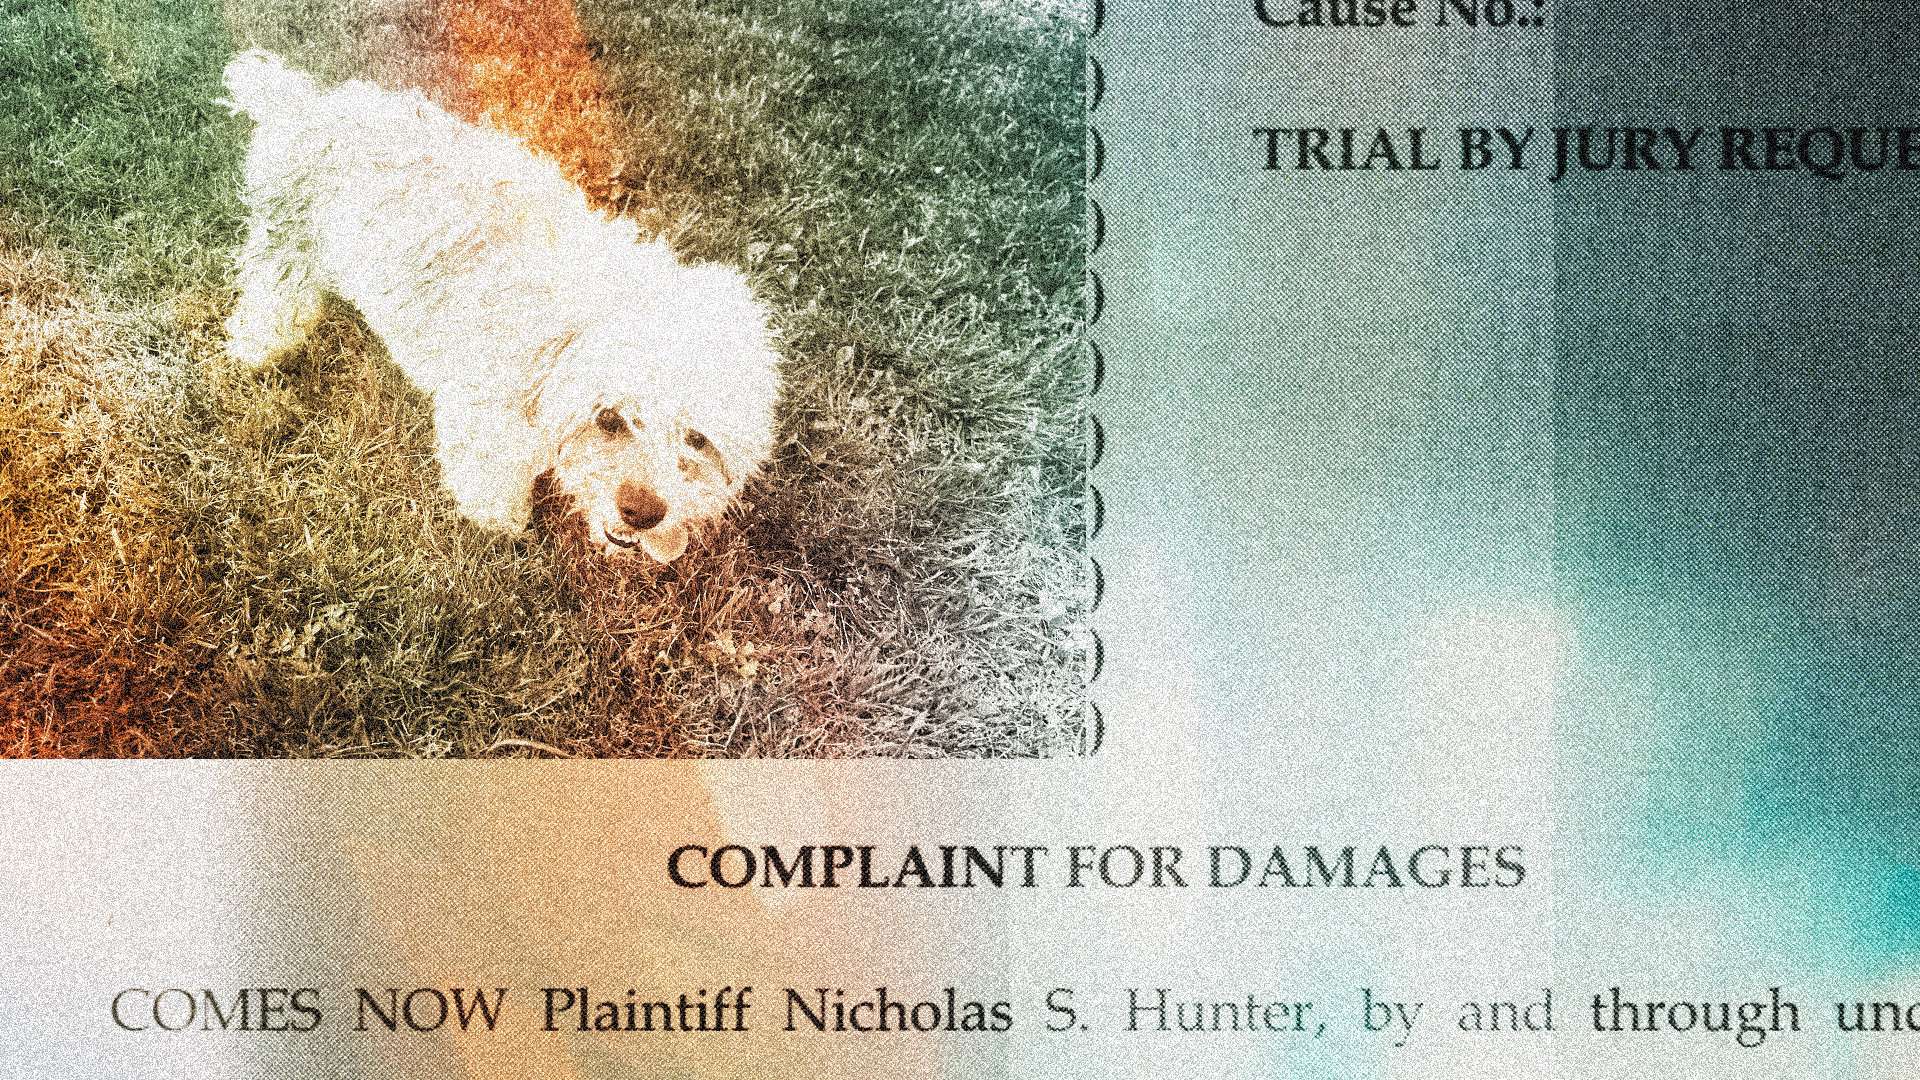 A Missouri police officer shot a blind and deaf dog. Now he's being sued.